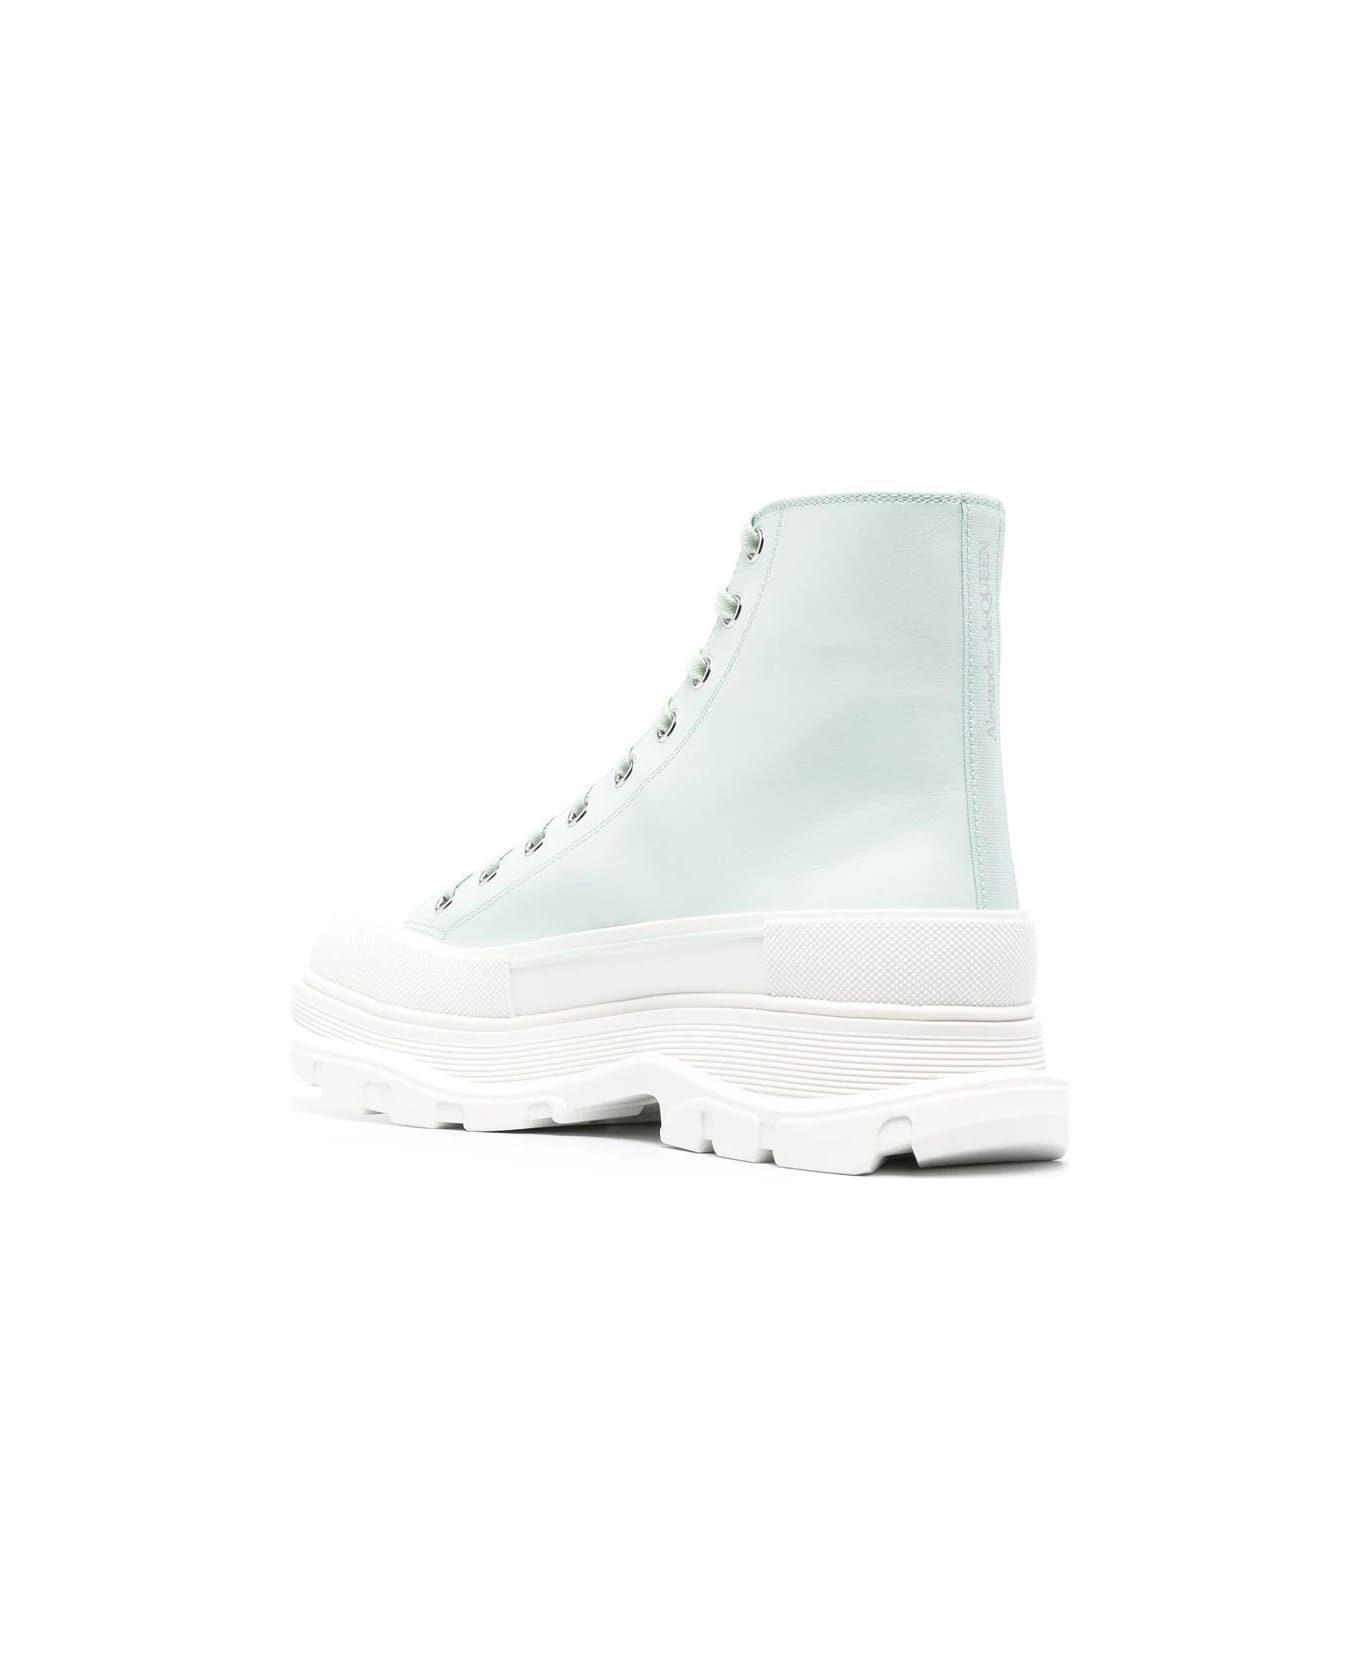 Alexander McQueen White Tread Slick Boots With Mint Green Shade - Bianco